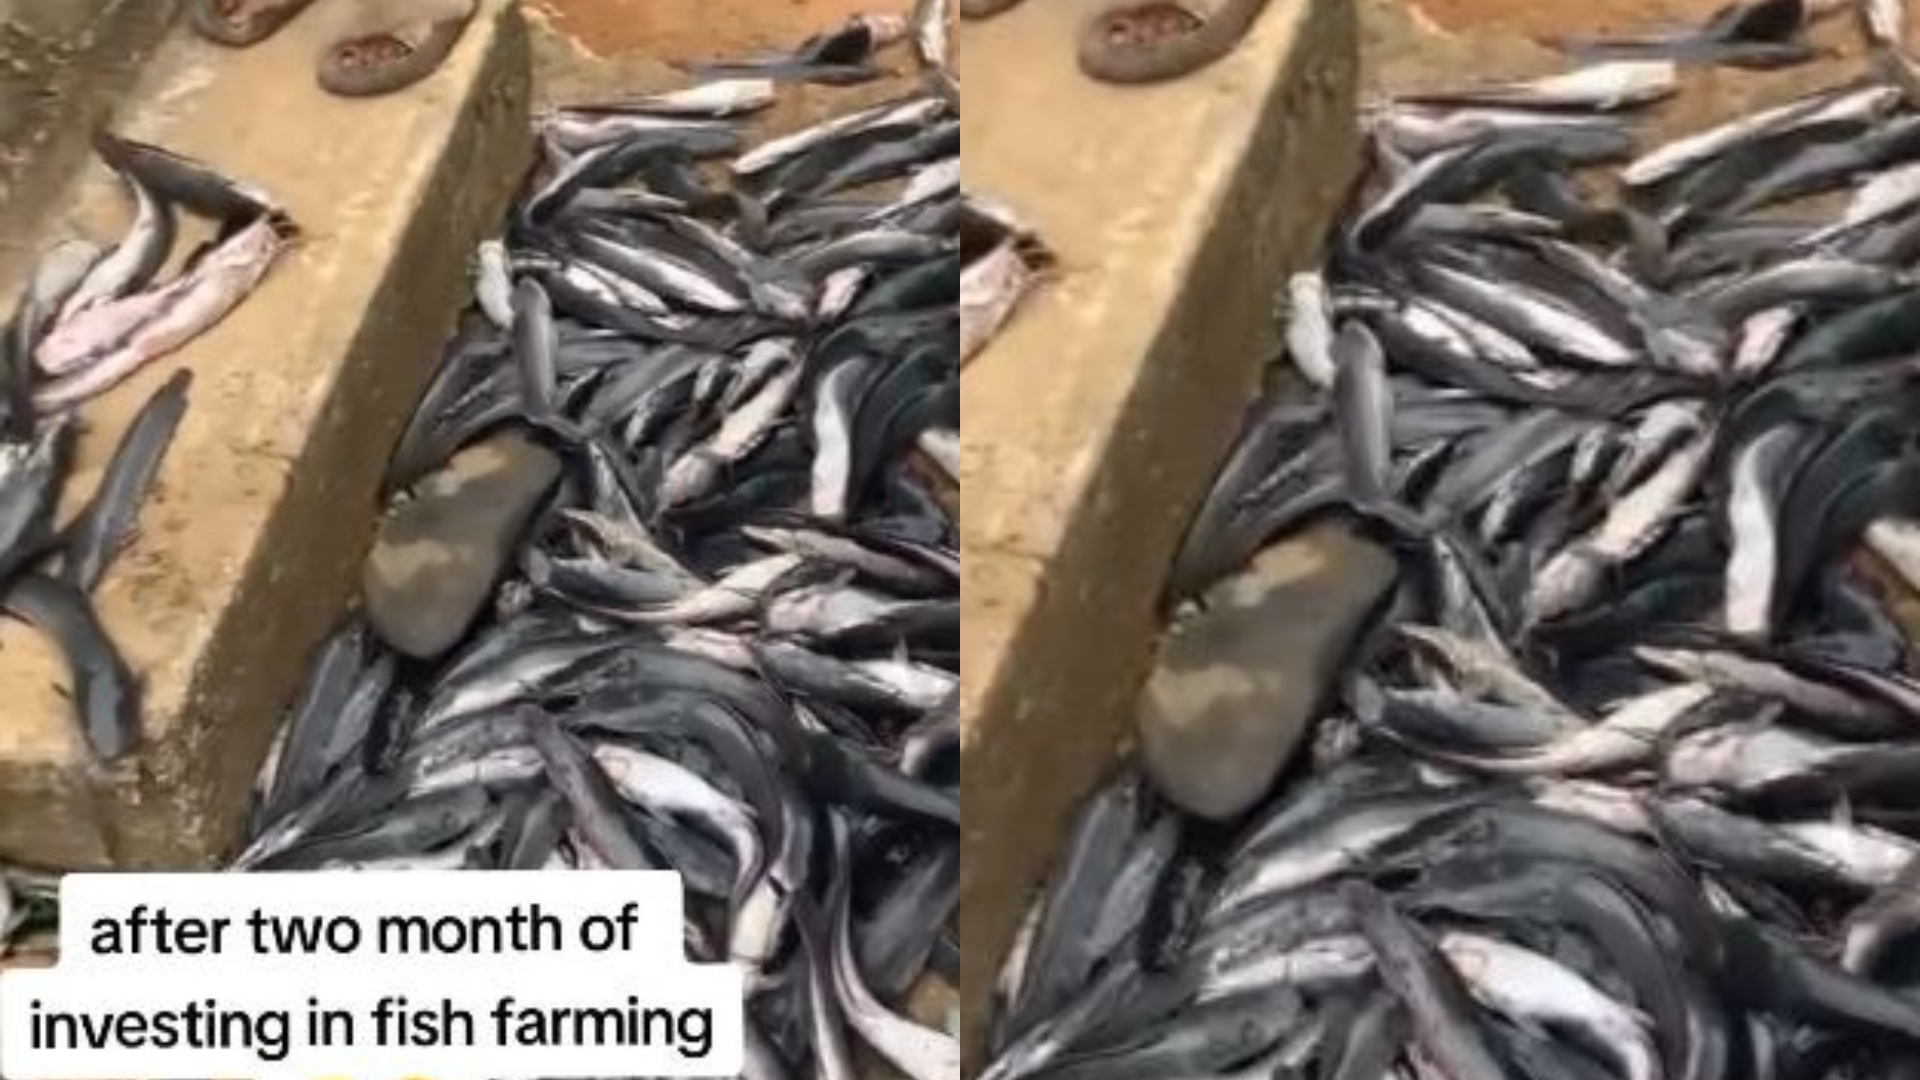 Fish farmer in distress as fish investment end in total ruin [Video]